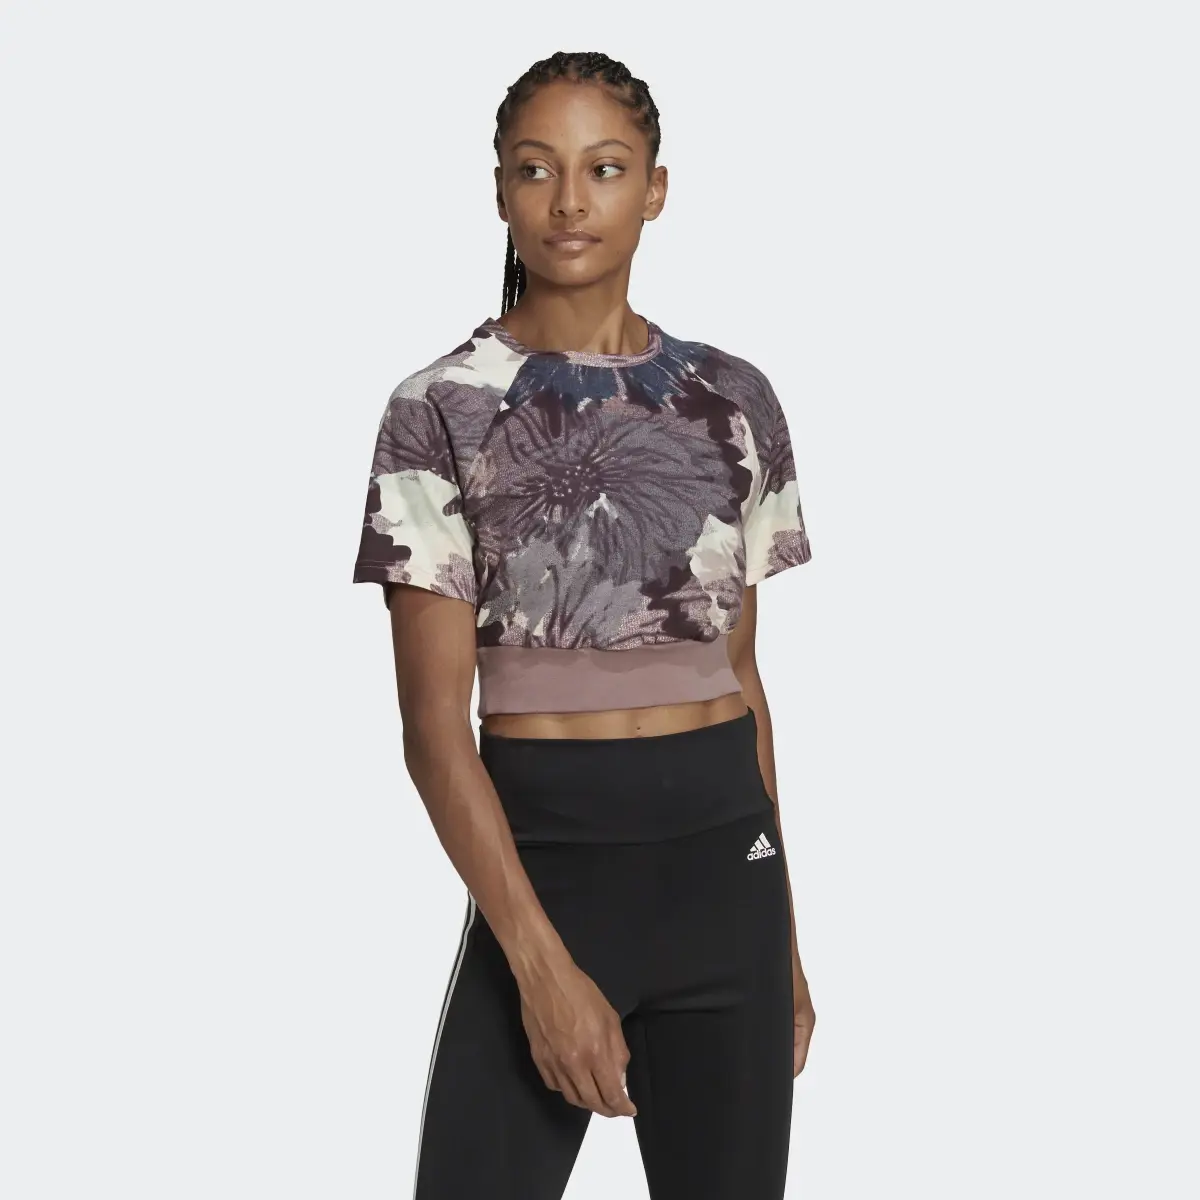 Adidas T-shirt Cropped Allover Print. 2